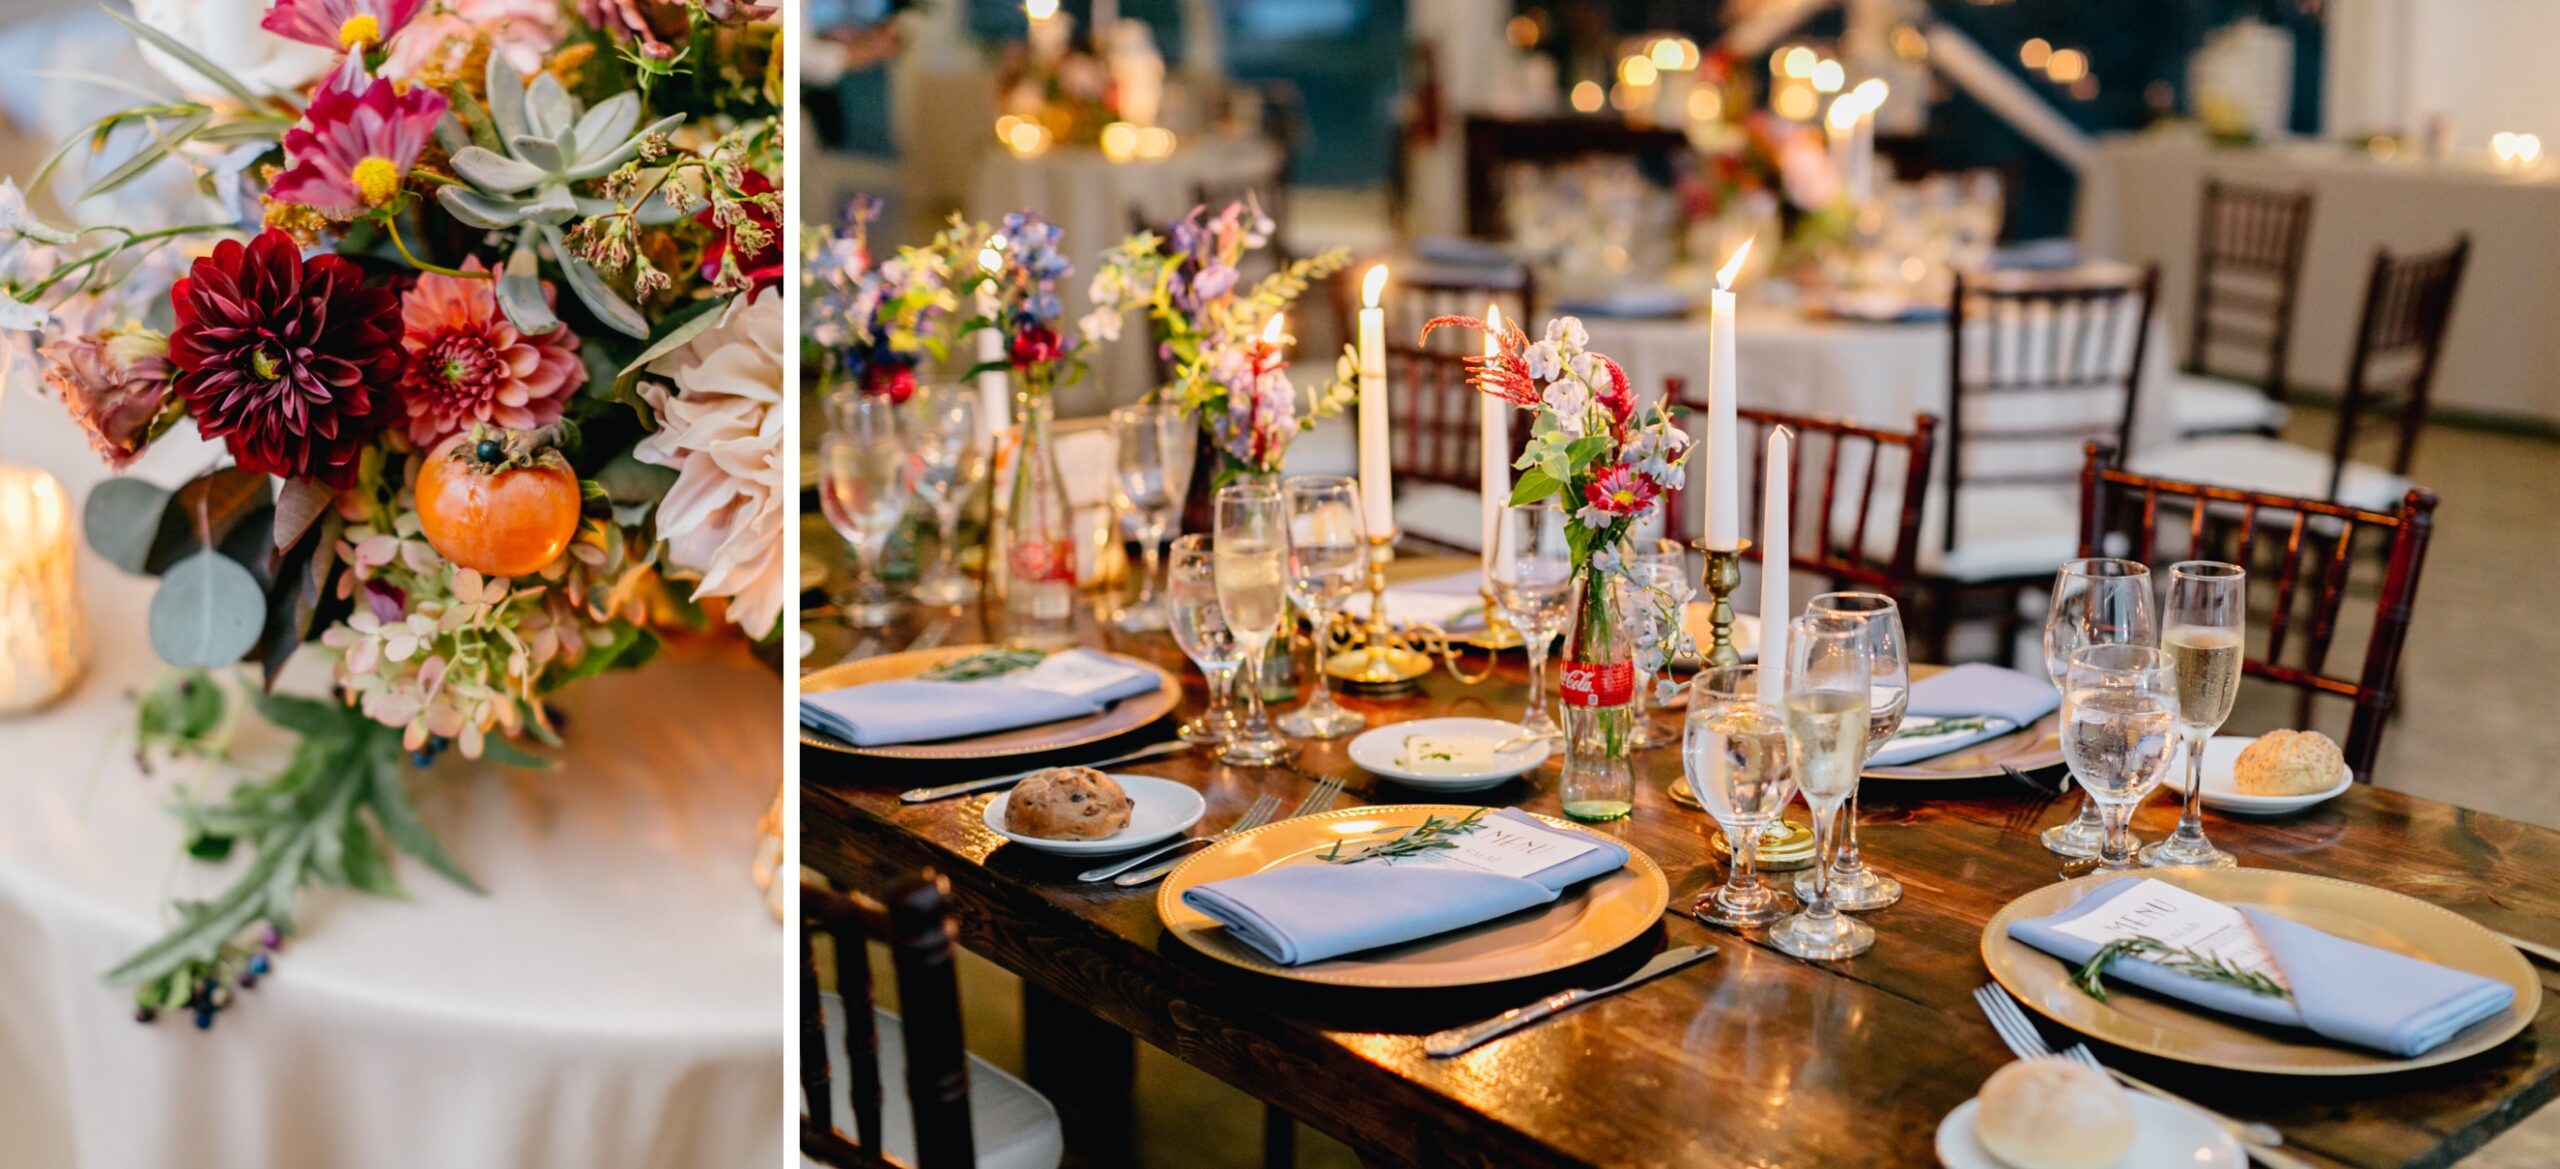 Candlelit reception with bud vases and bright flowers